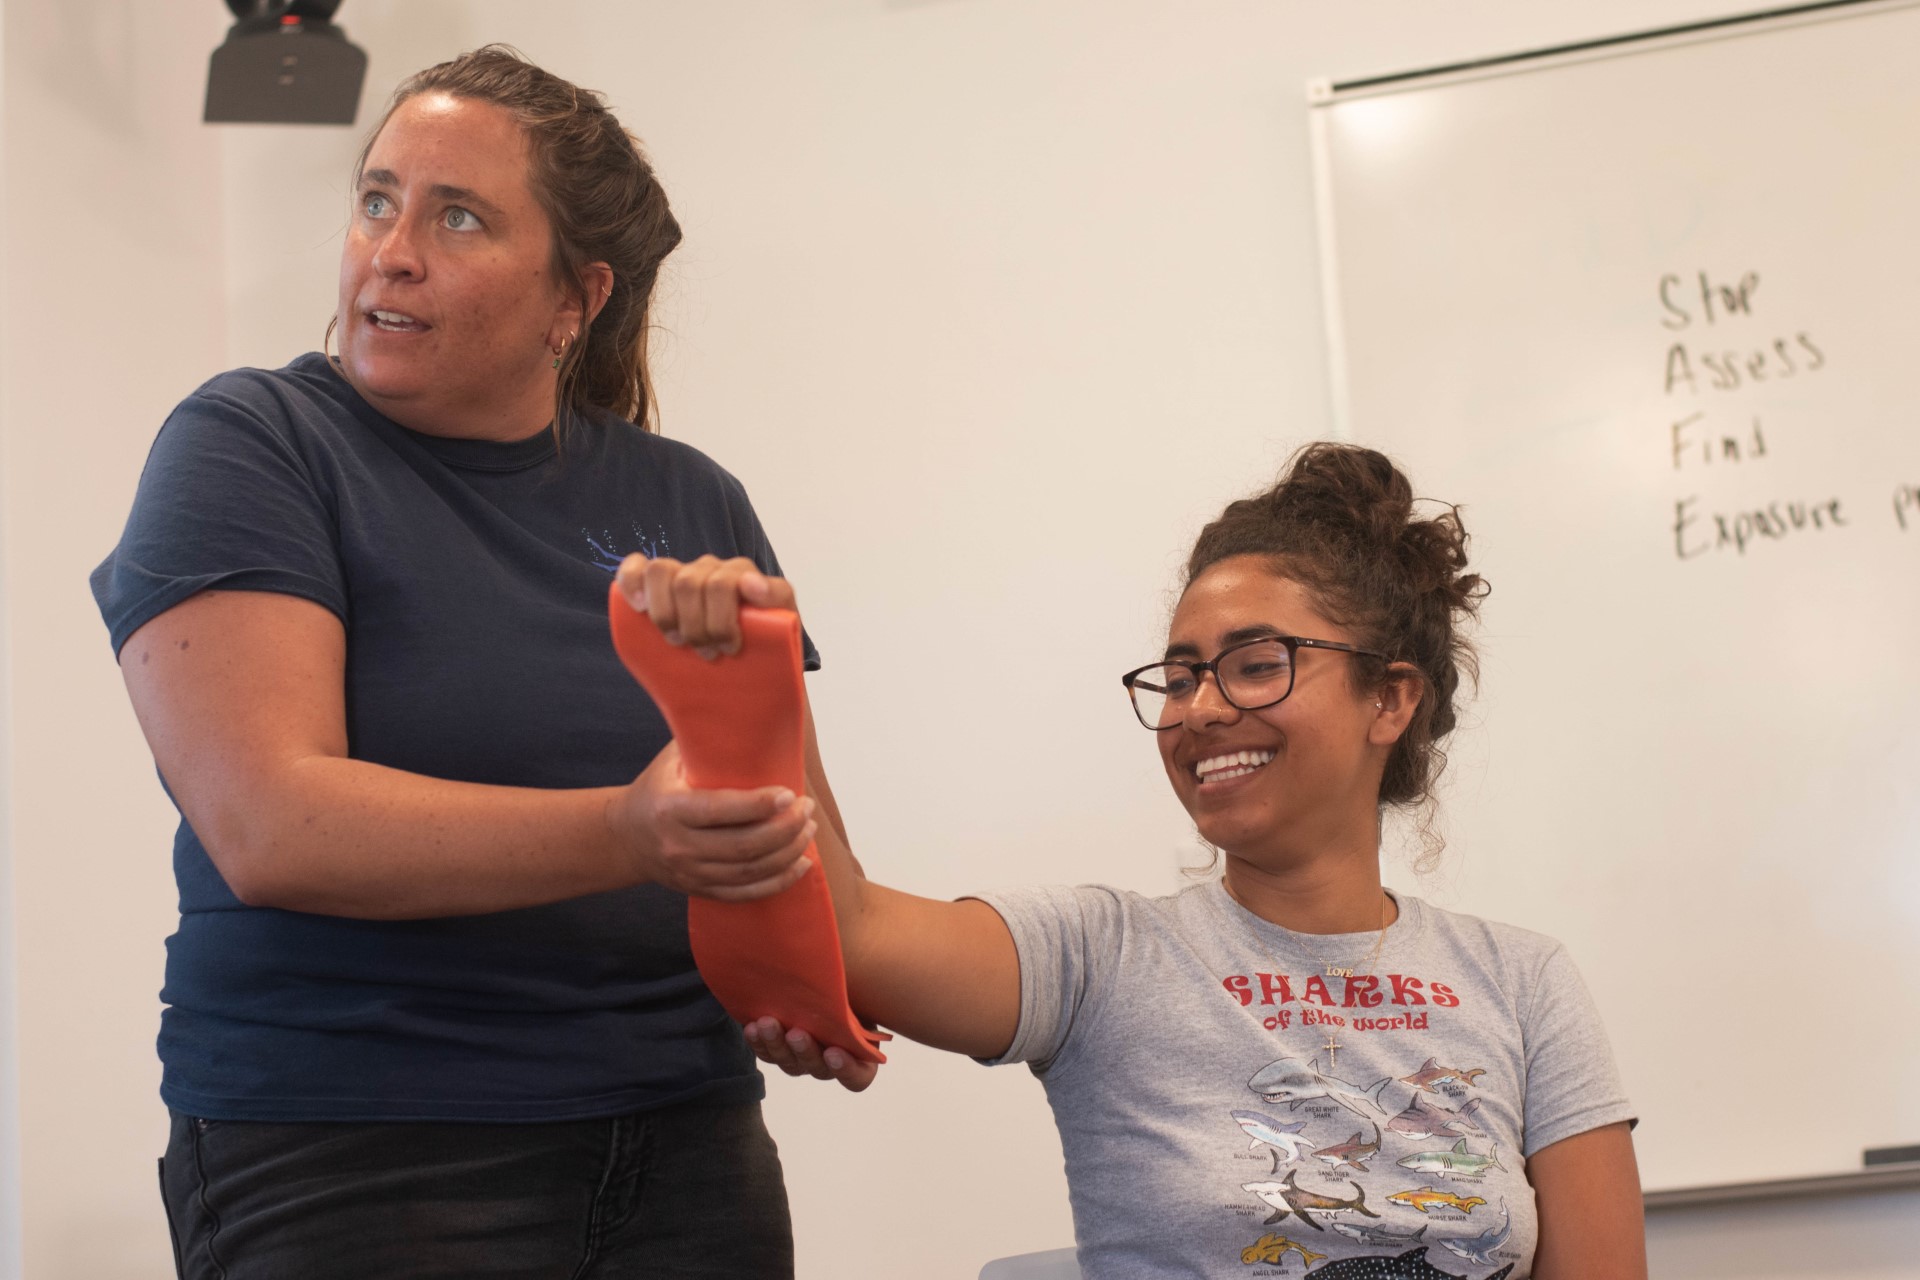 an instructor holds up the arm of a smiling student who is holding onto a bright-orange board as part of a first-aid demonstration